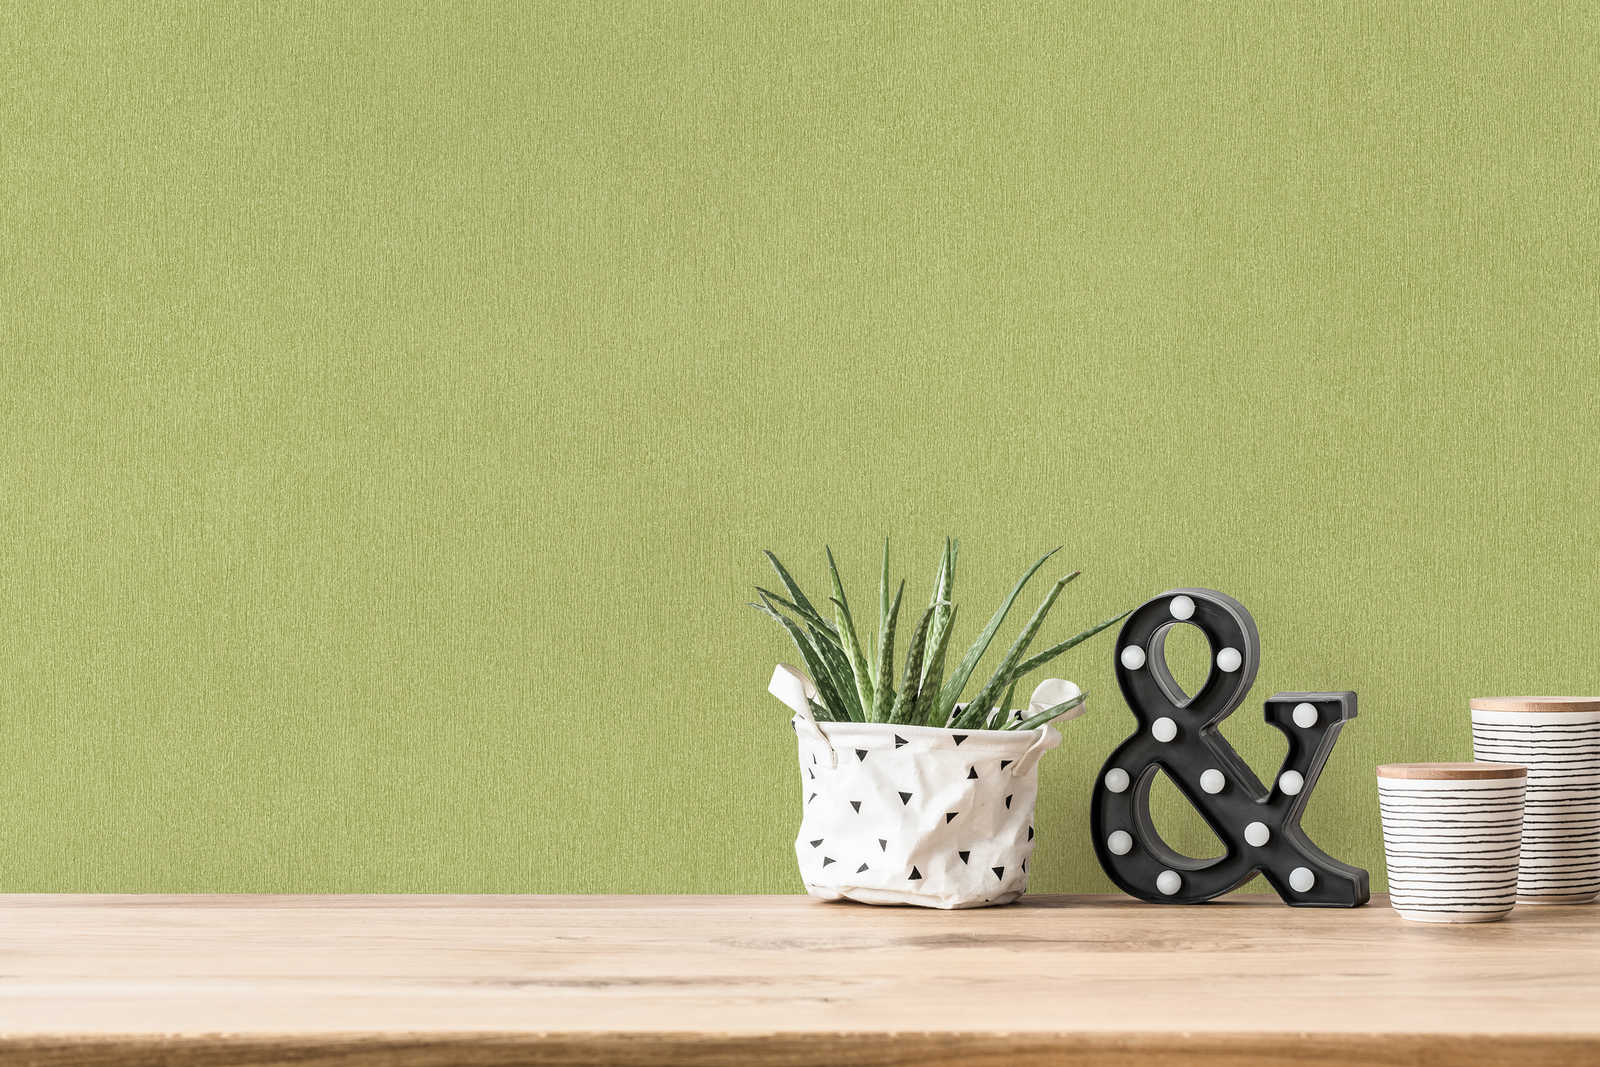             Wallpaper light green monochrome lime green with colour hatching
        